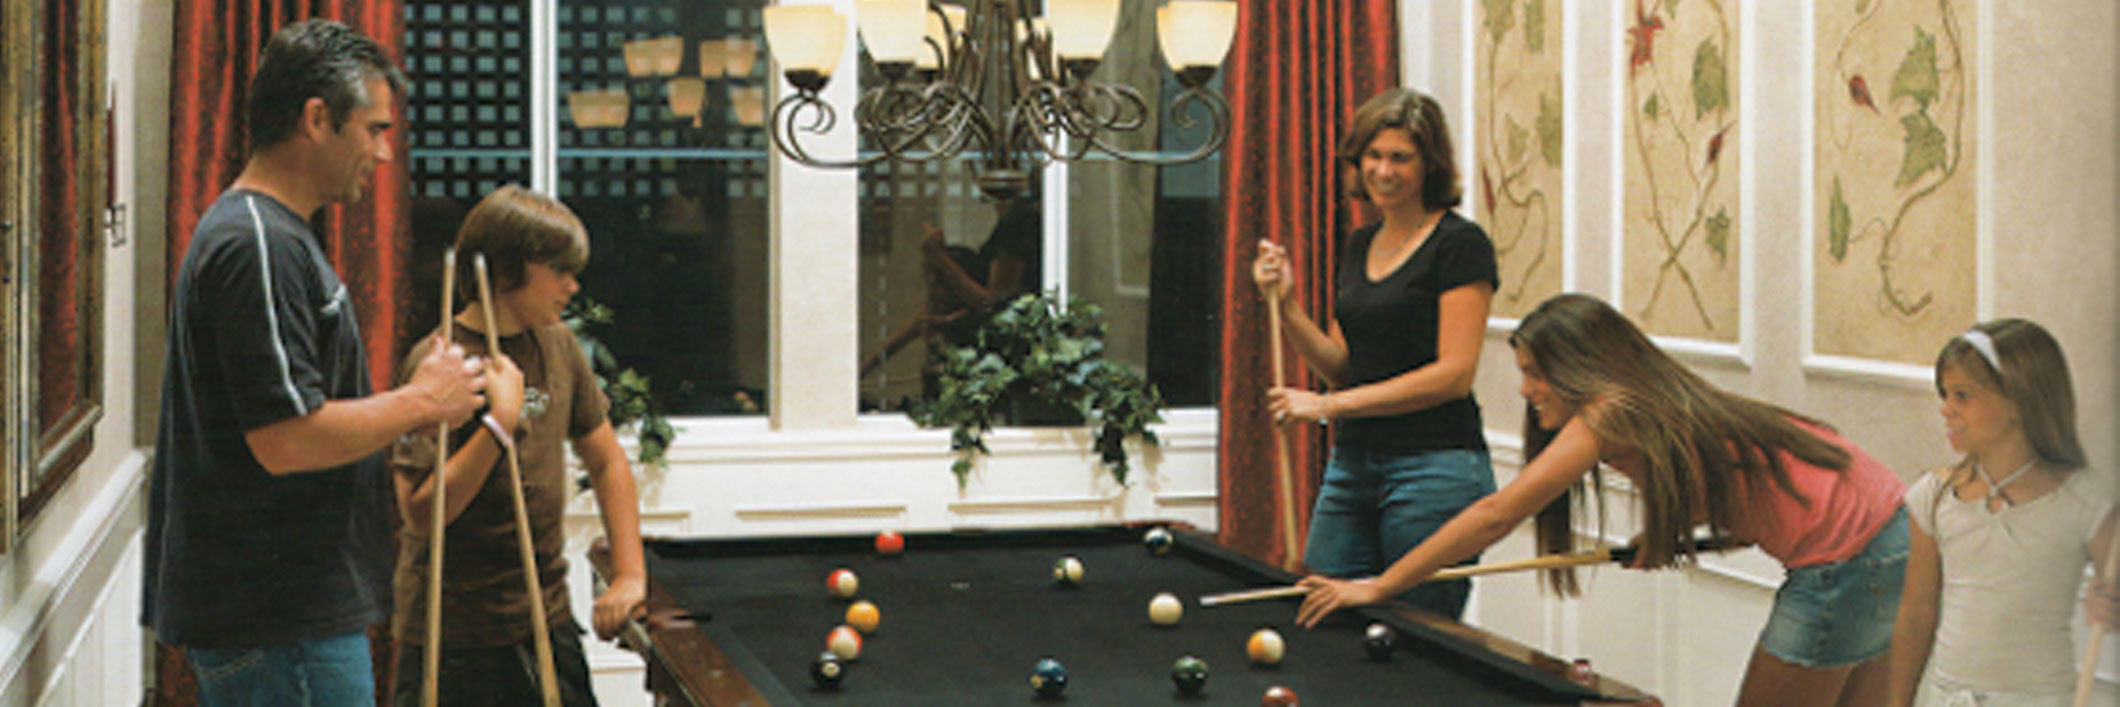 630.834.1220 Cue-N-Cushion, Pool Tables, Billiards in Chicago area Visit Cue-N-Cushion for great recreation ideas!